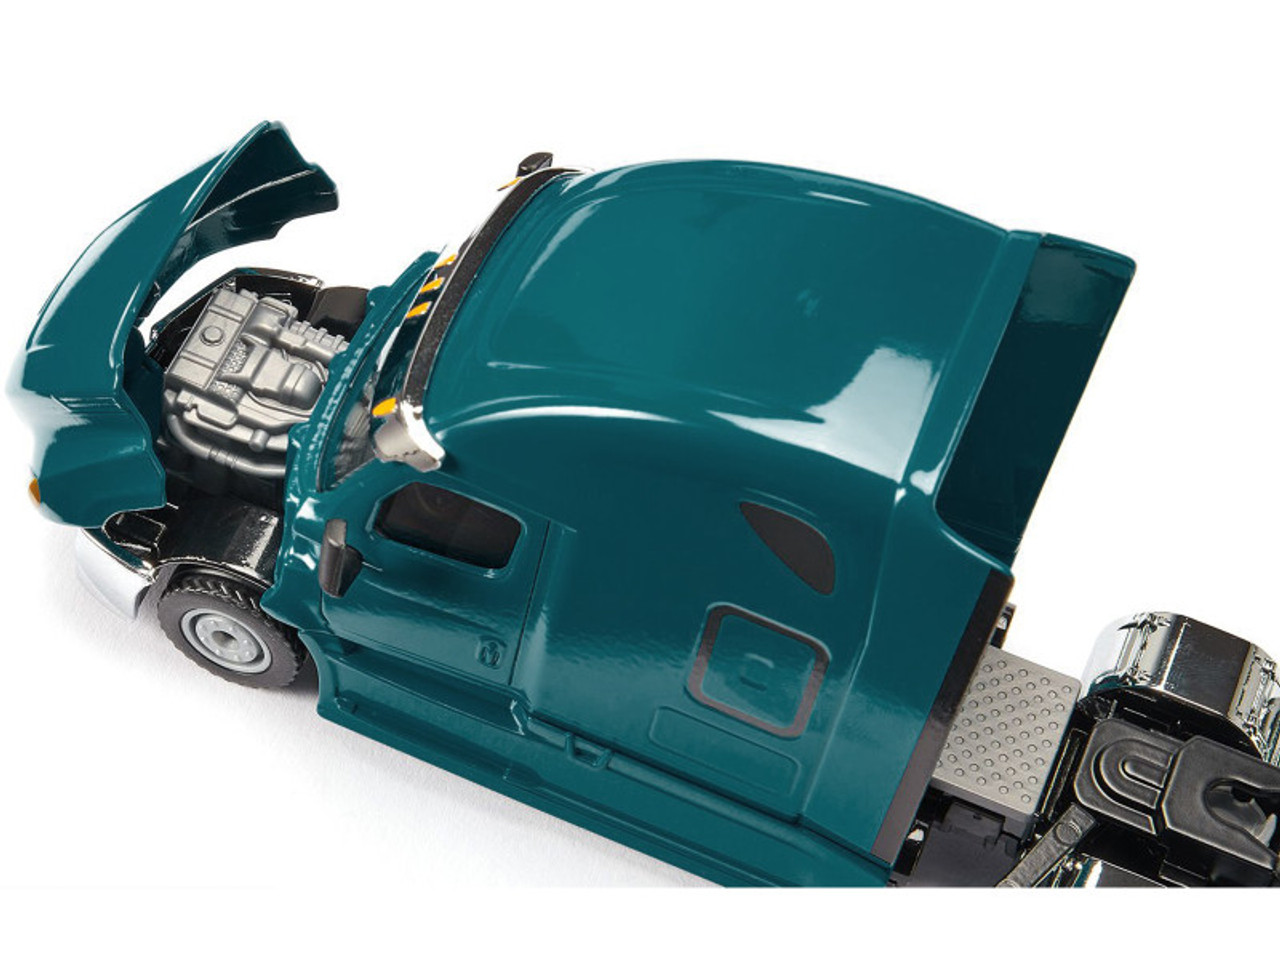 Freightliner Cascadia Tractor Truck Teal 1/50 Diecast Model by Siku